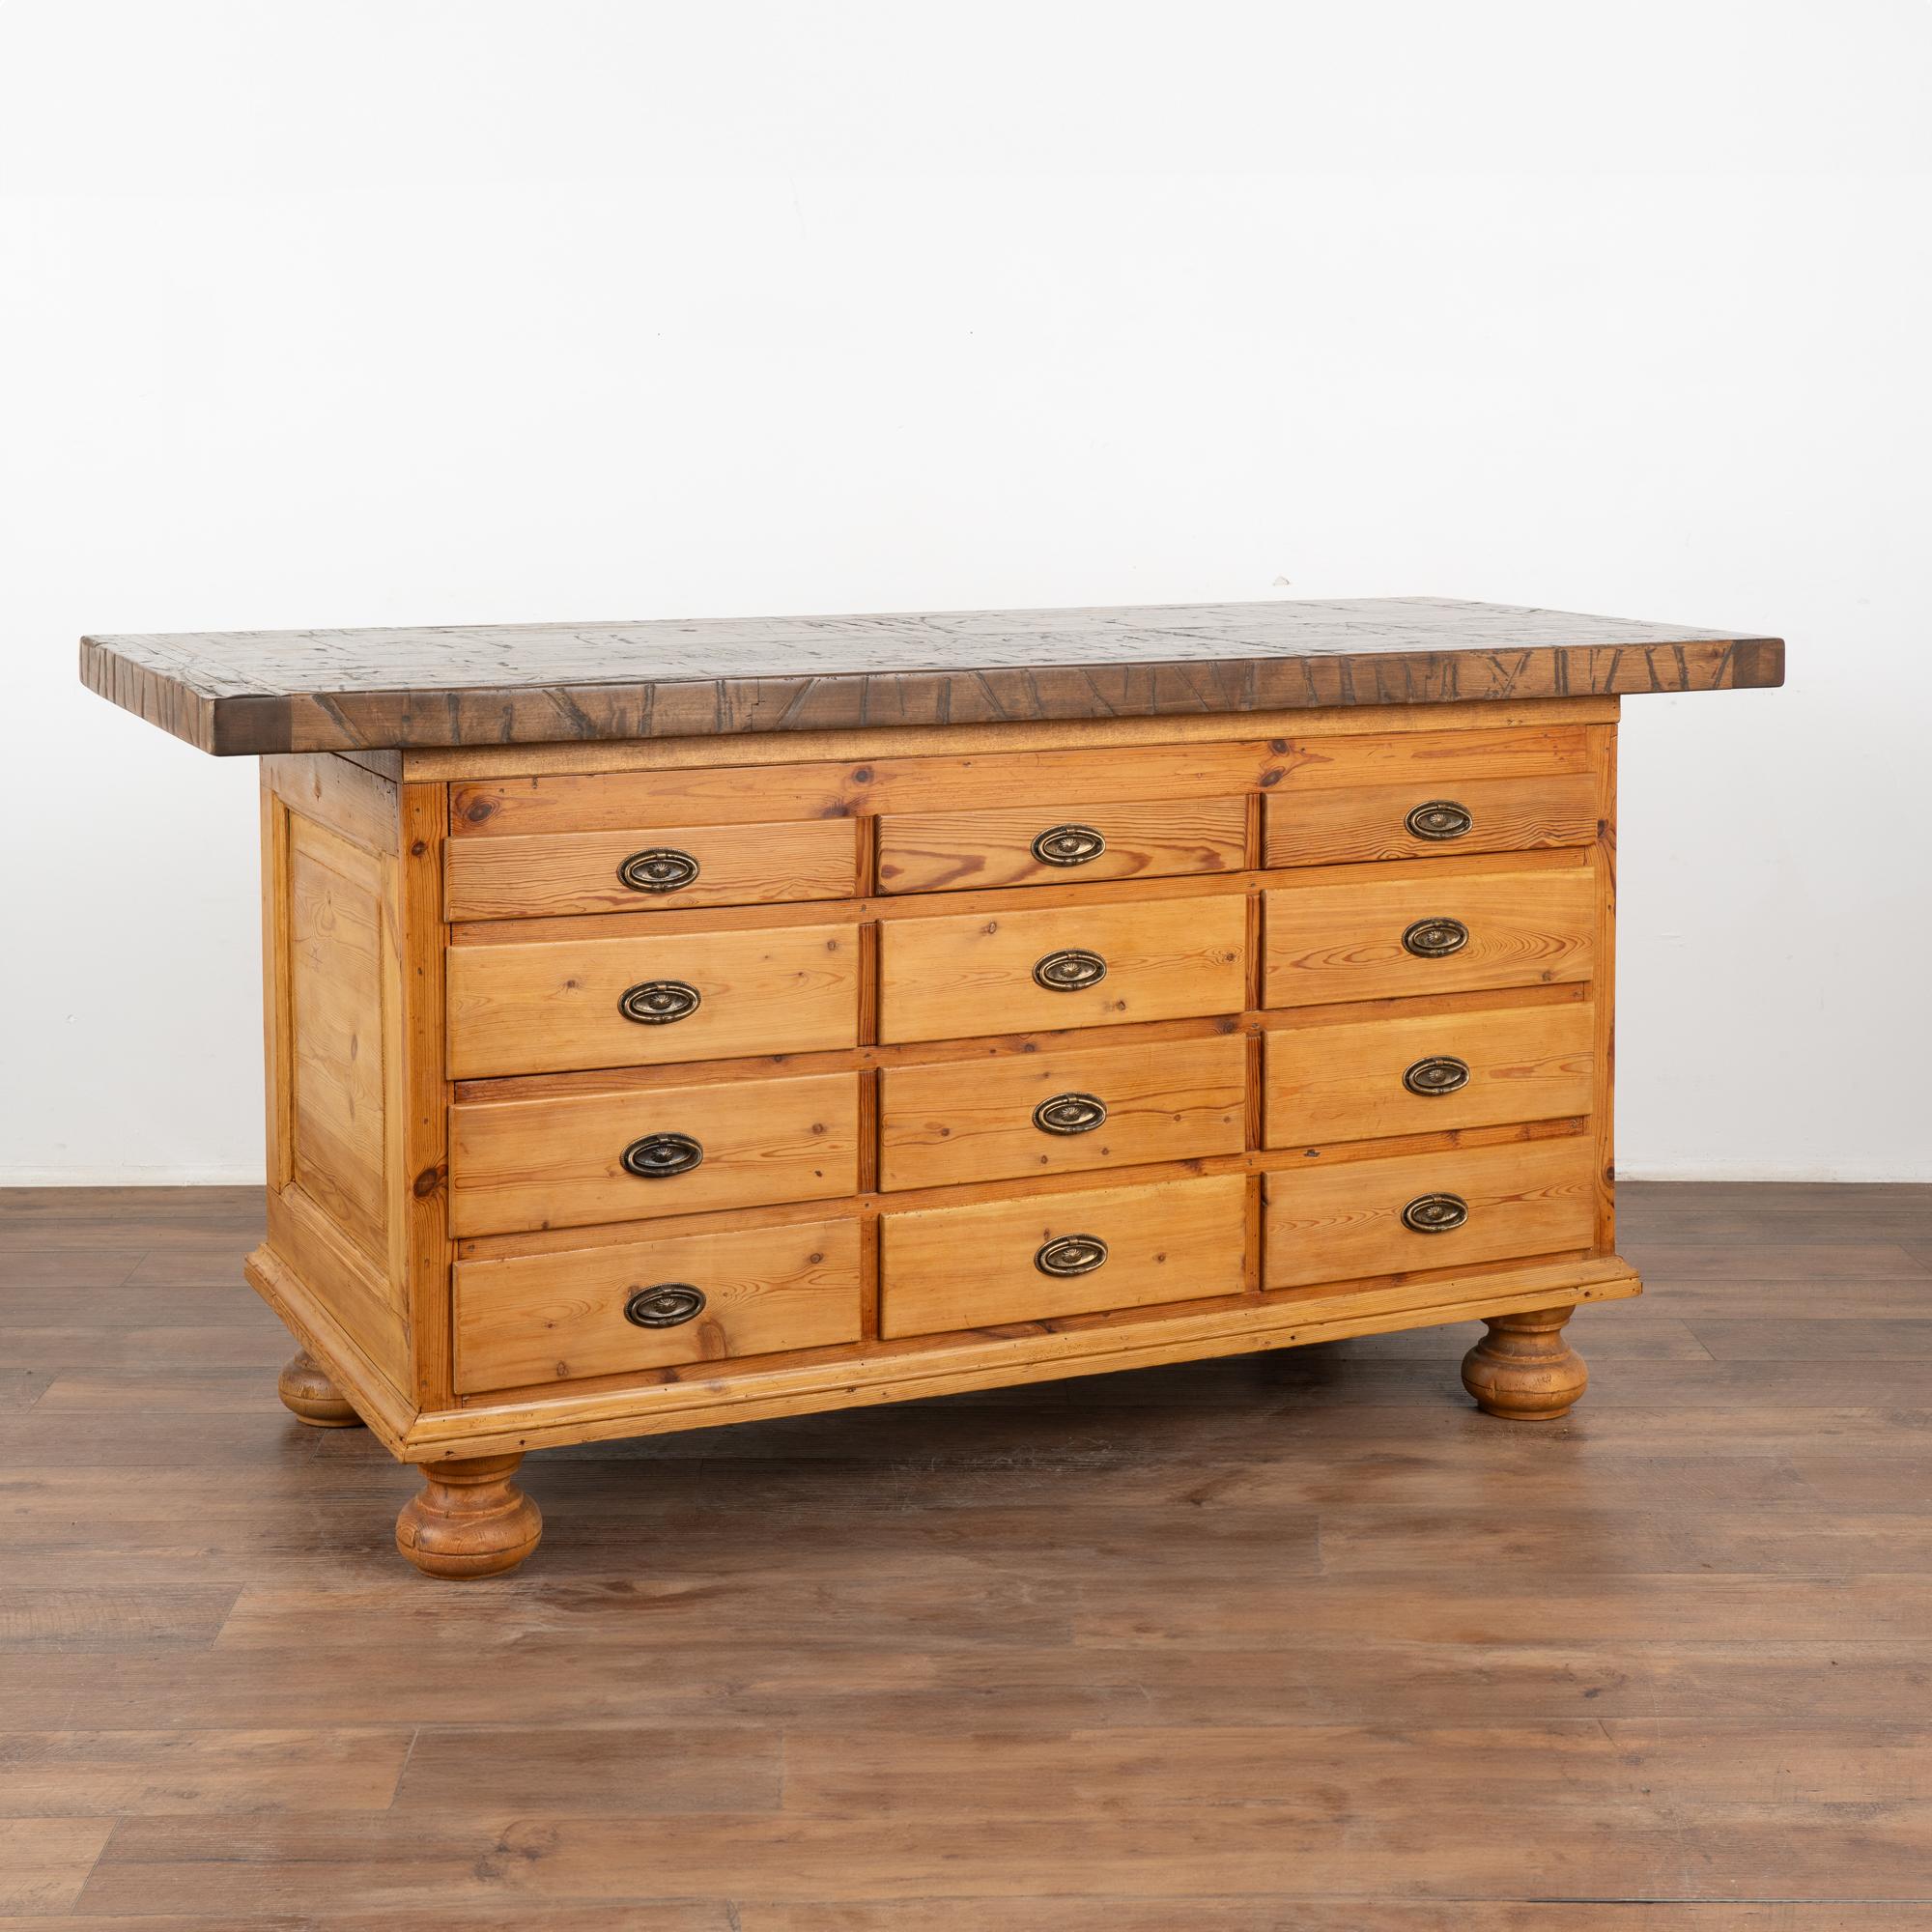 This impressive freestanding island will be the gathering place in any kitchen. This versatile piece originally served as a grocer's shop counter in the 1800's and is finished on all four sides. 
The front area served as storage with 12 drawers with